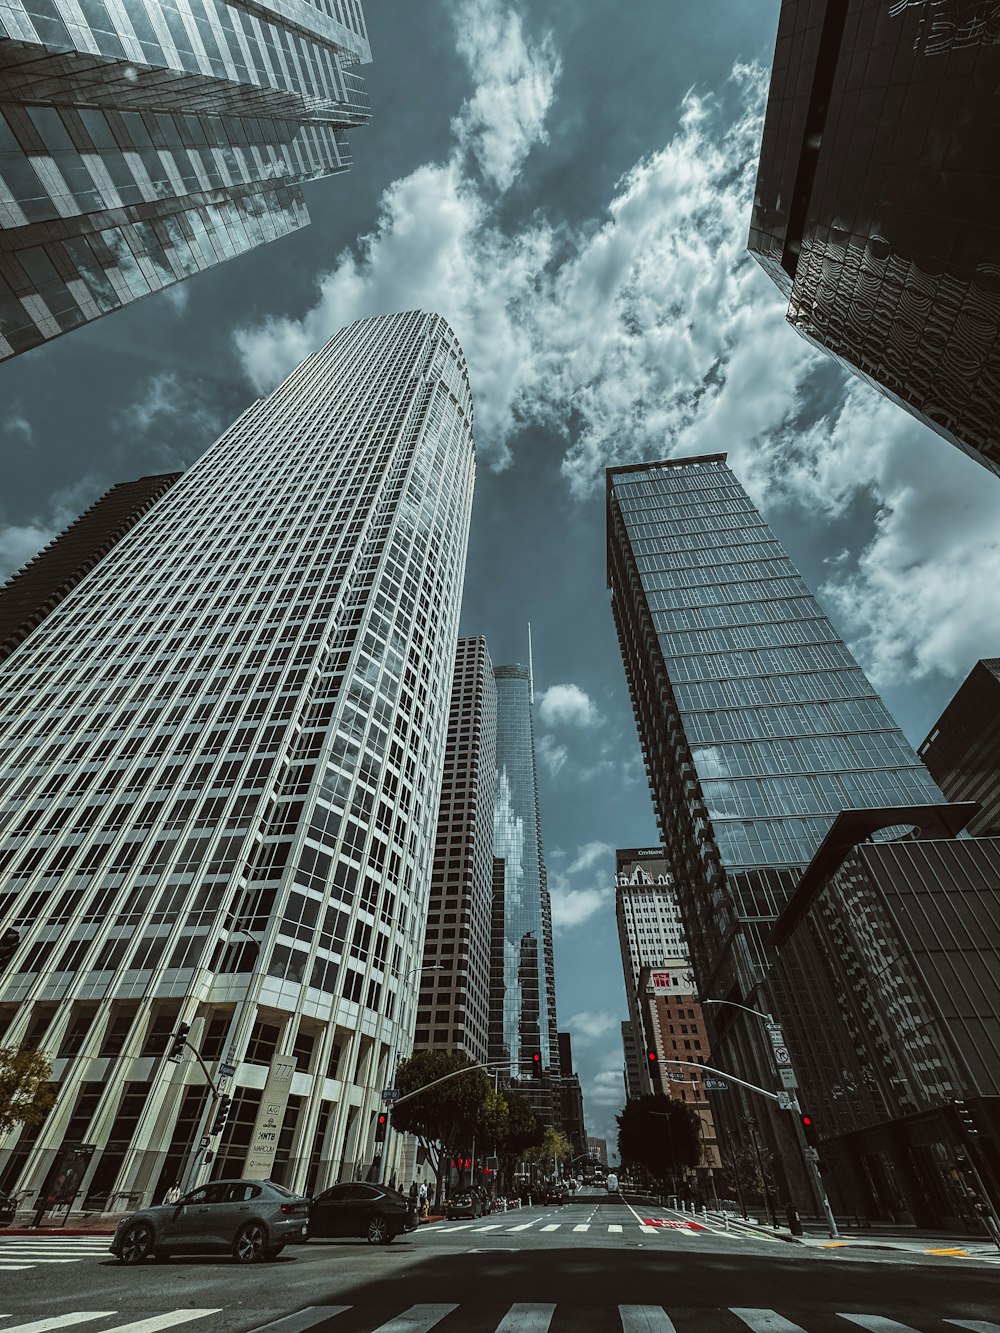 a city street filled with tall buildings under a cloudy sky